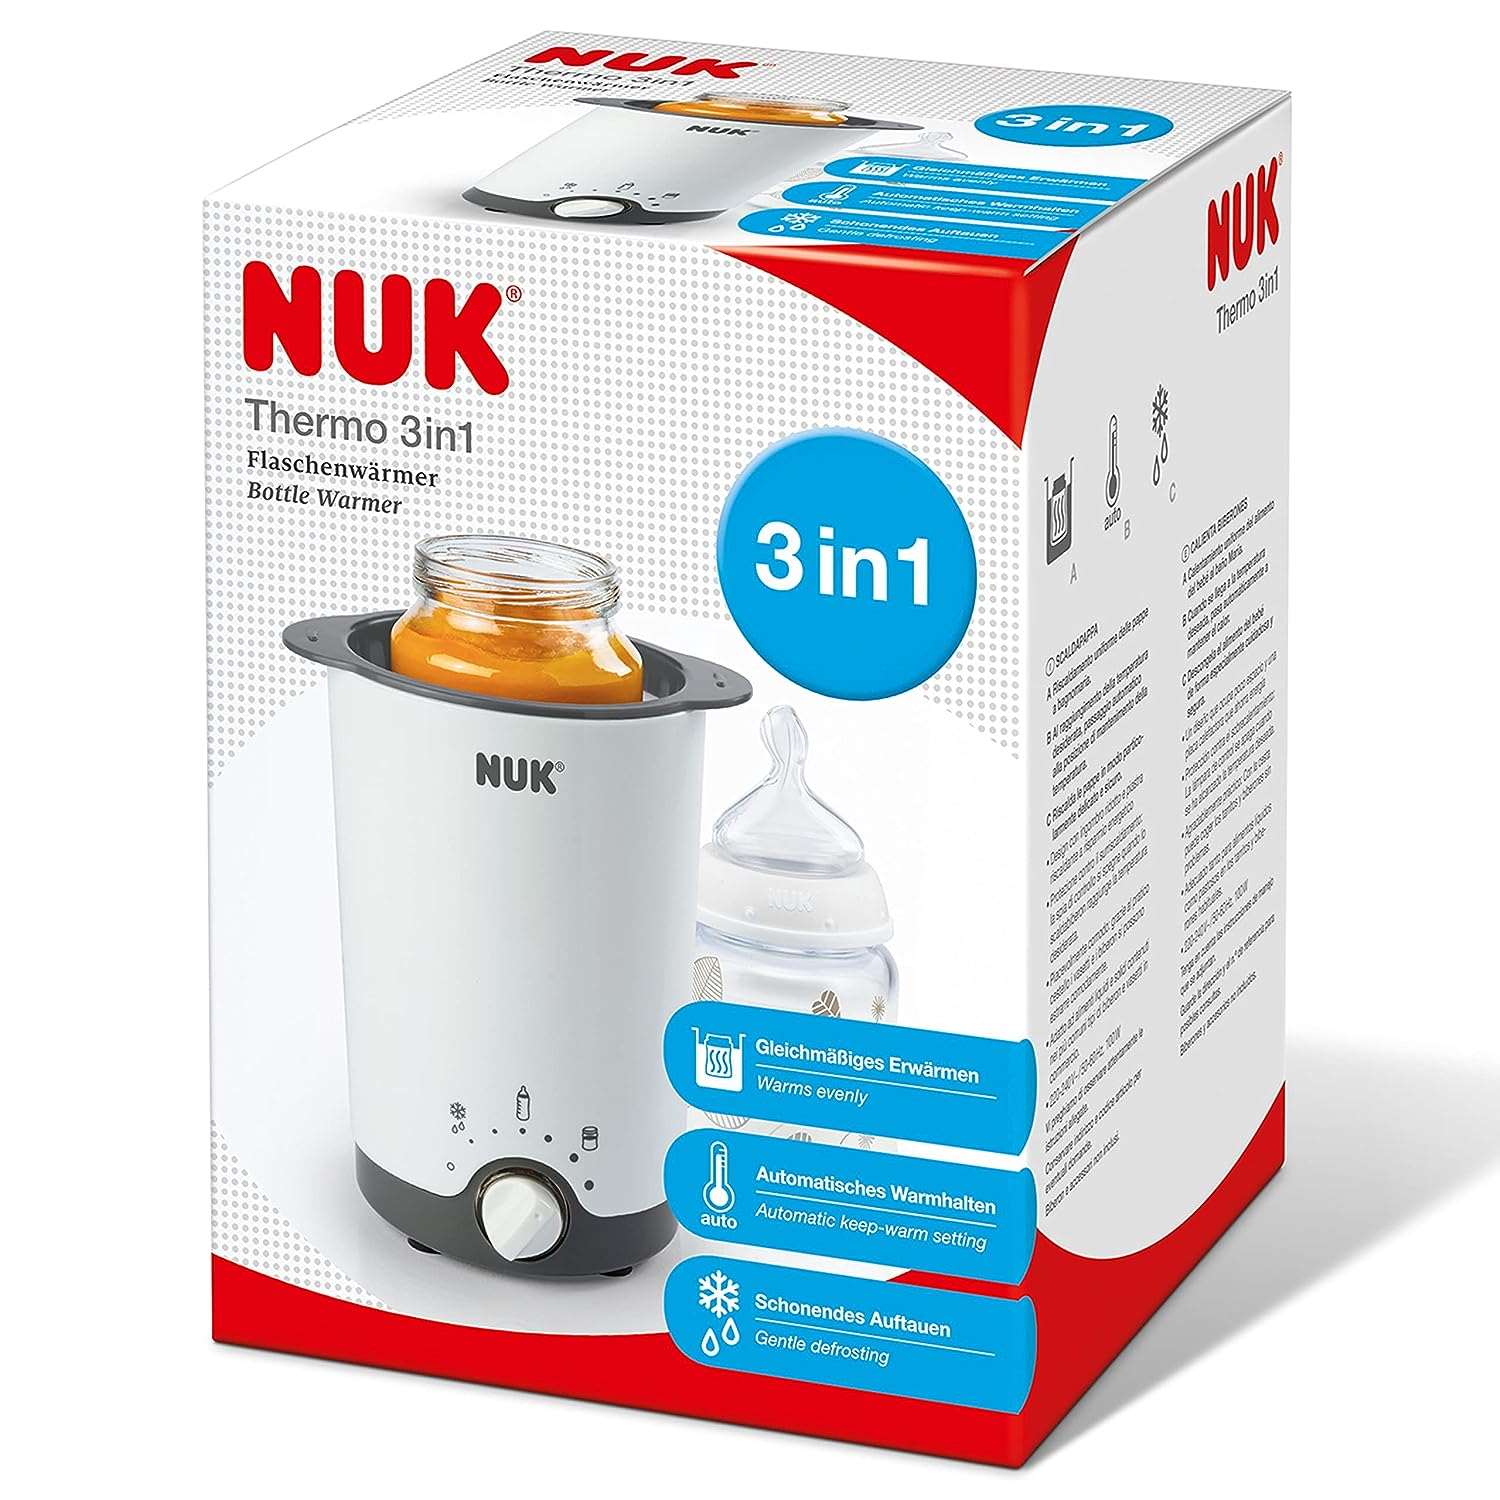 NUK Thermo 3-in-1 bottle warmer for easy, safe and gentle heating, defrosting and keeping warm, for glasses and bottles.